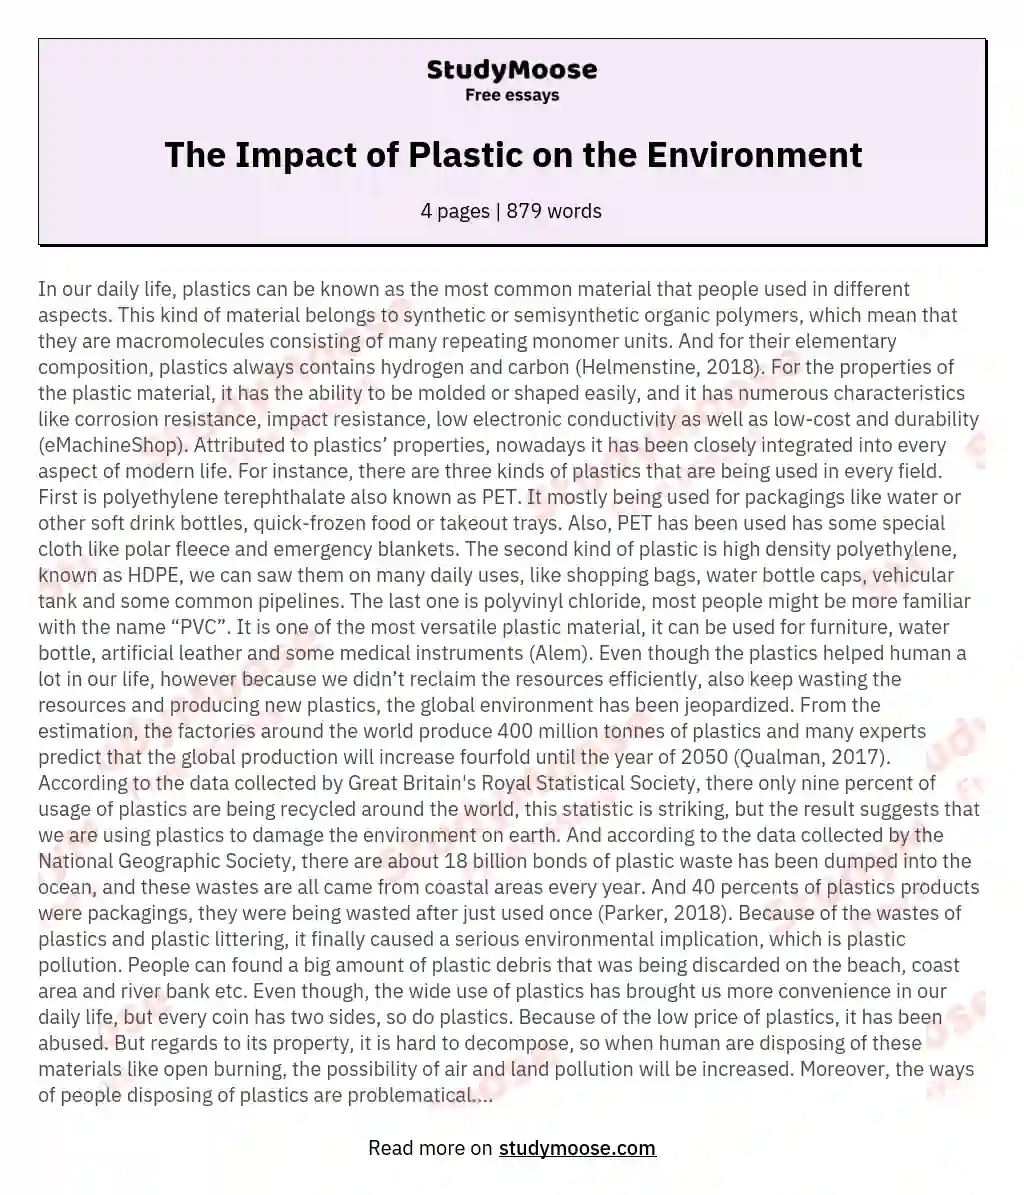 The Impact of Plastic on the Environment essay